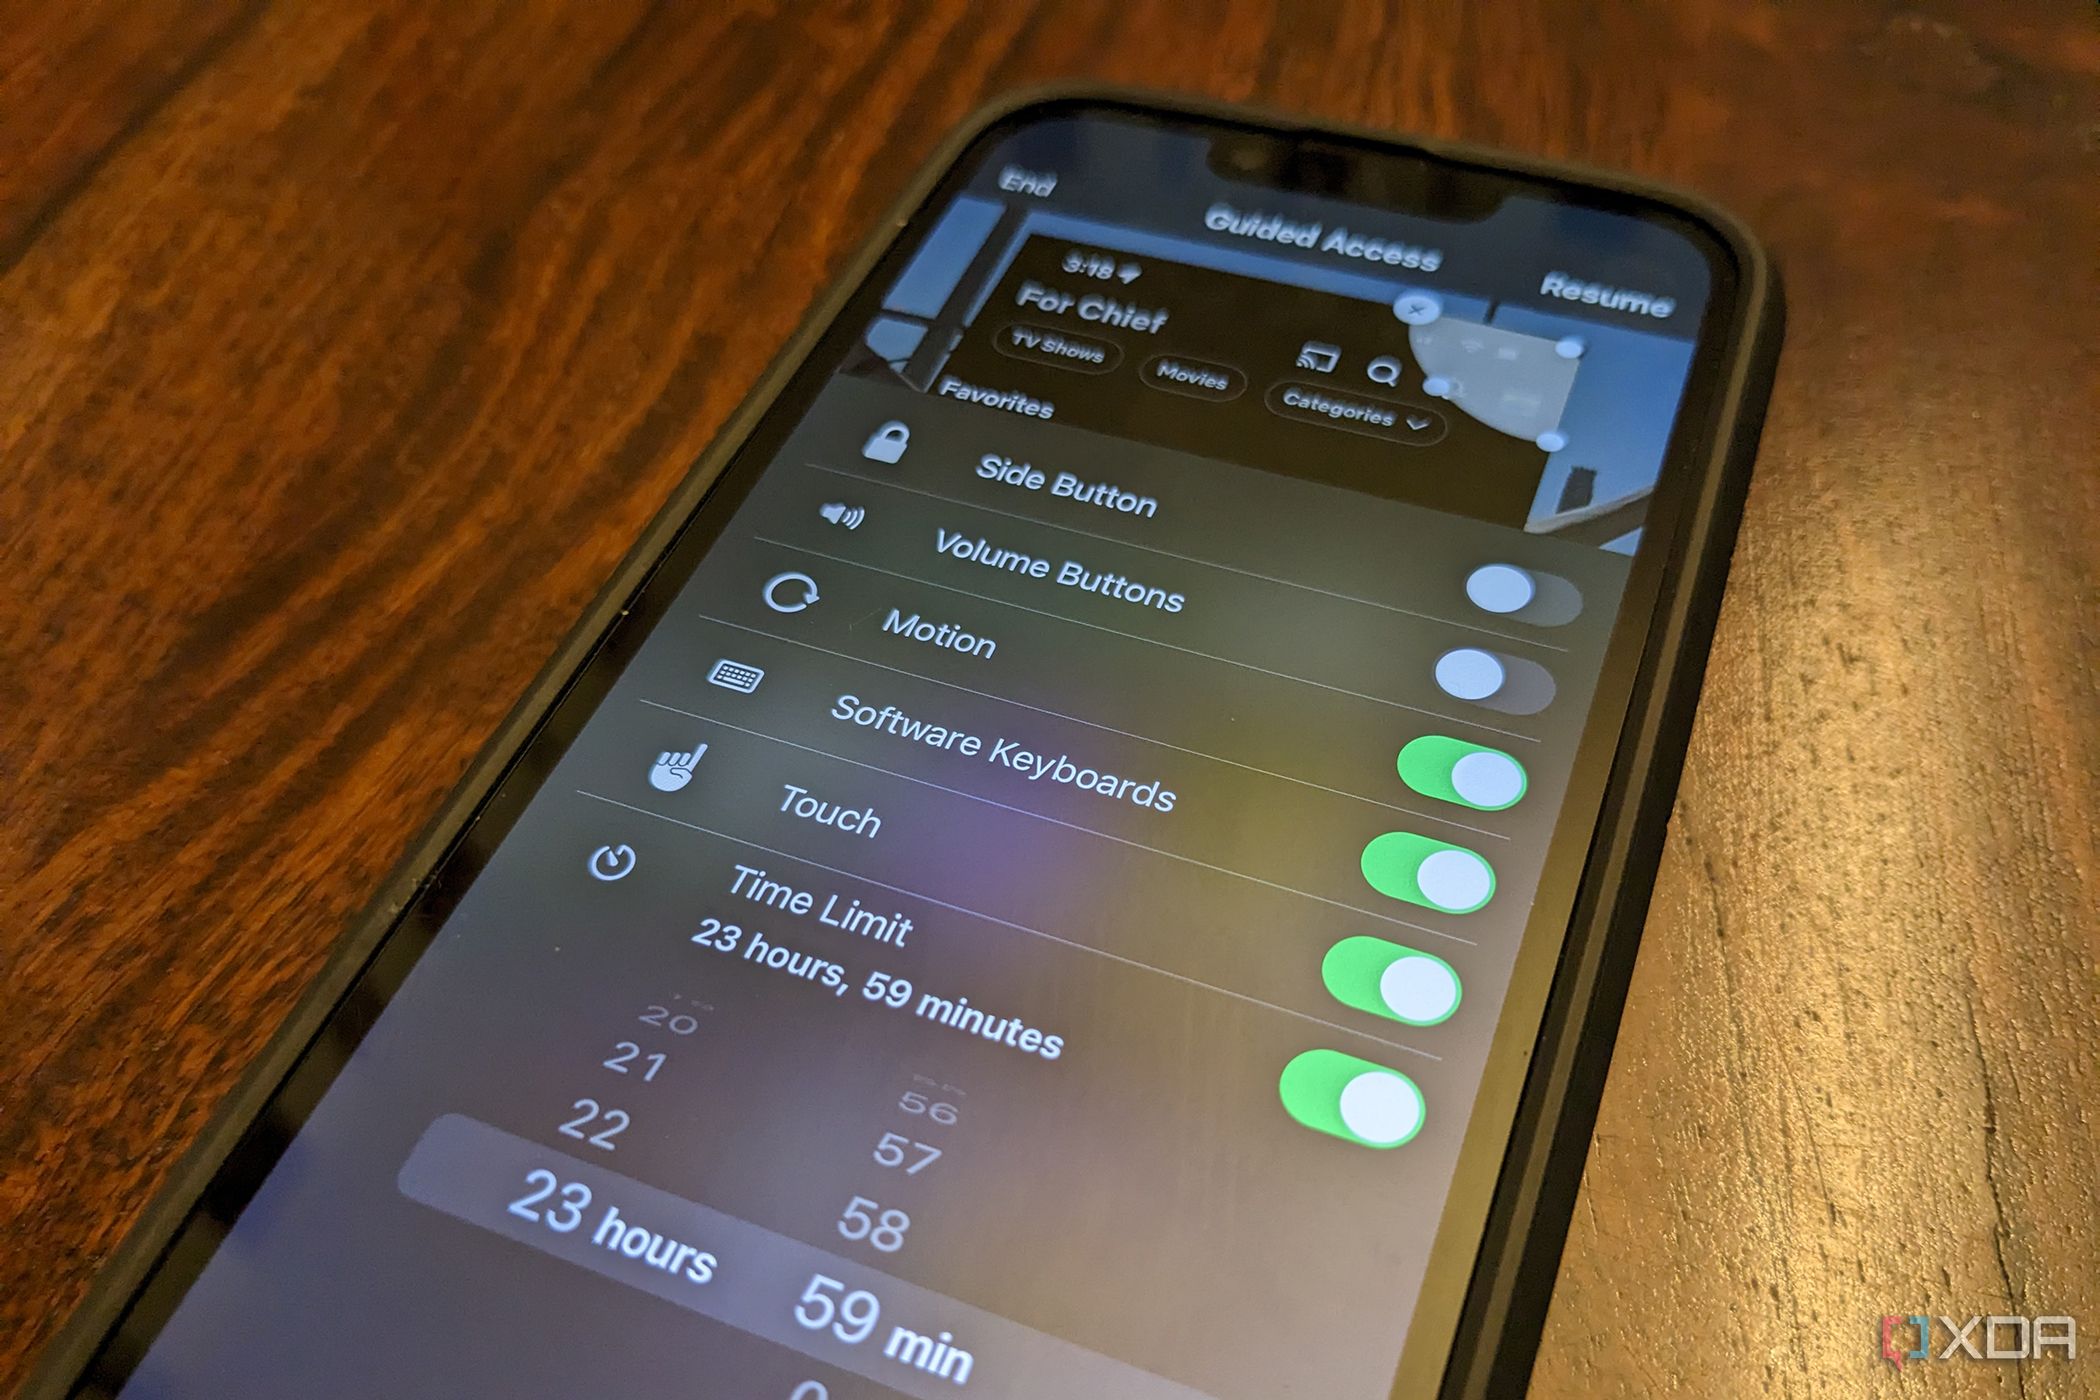 iphone controlled access options